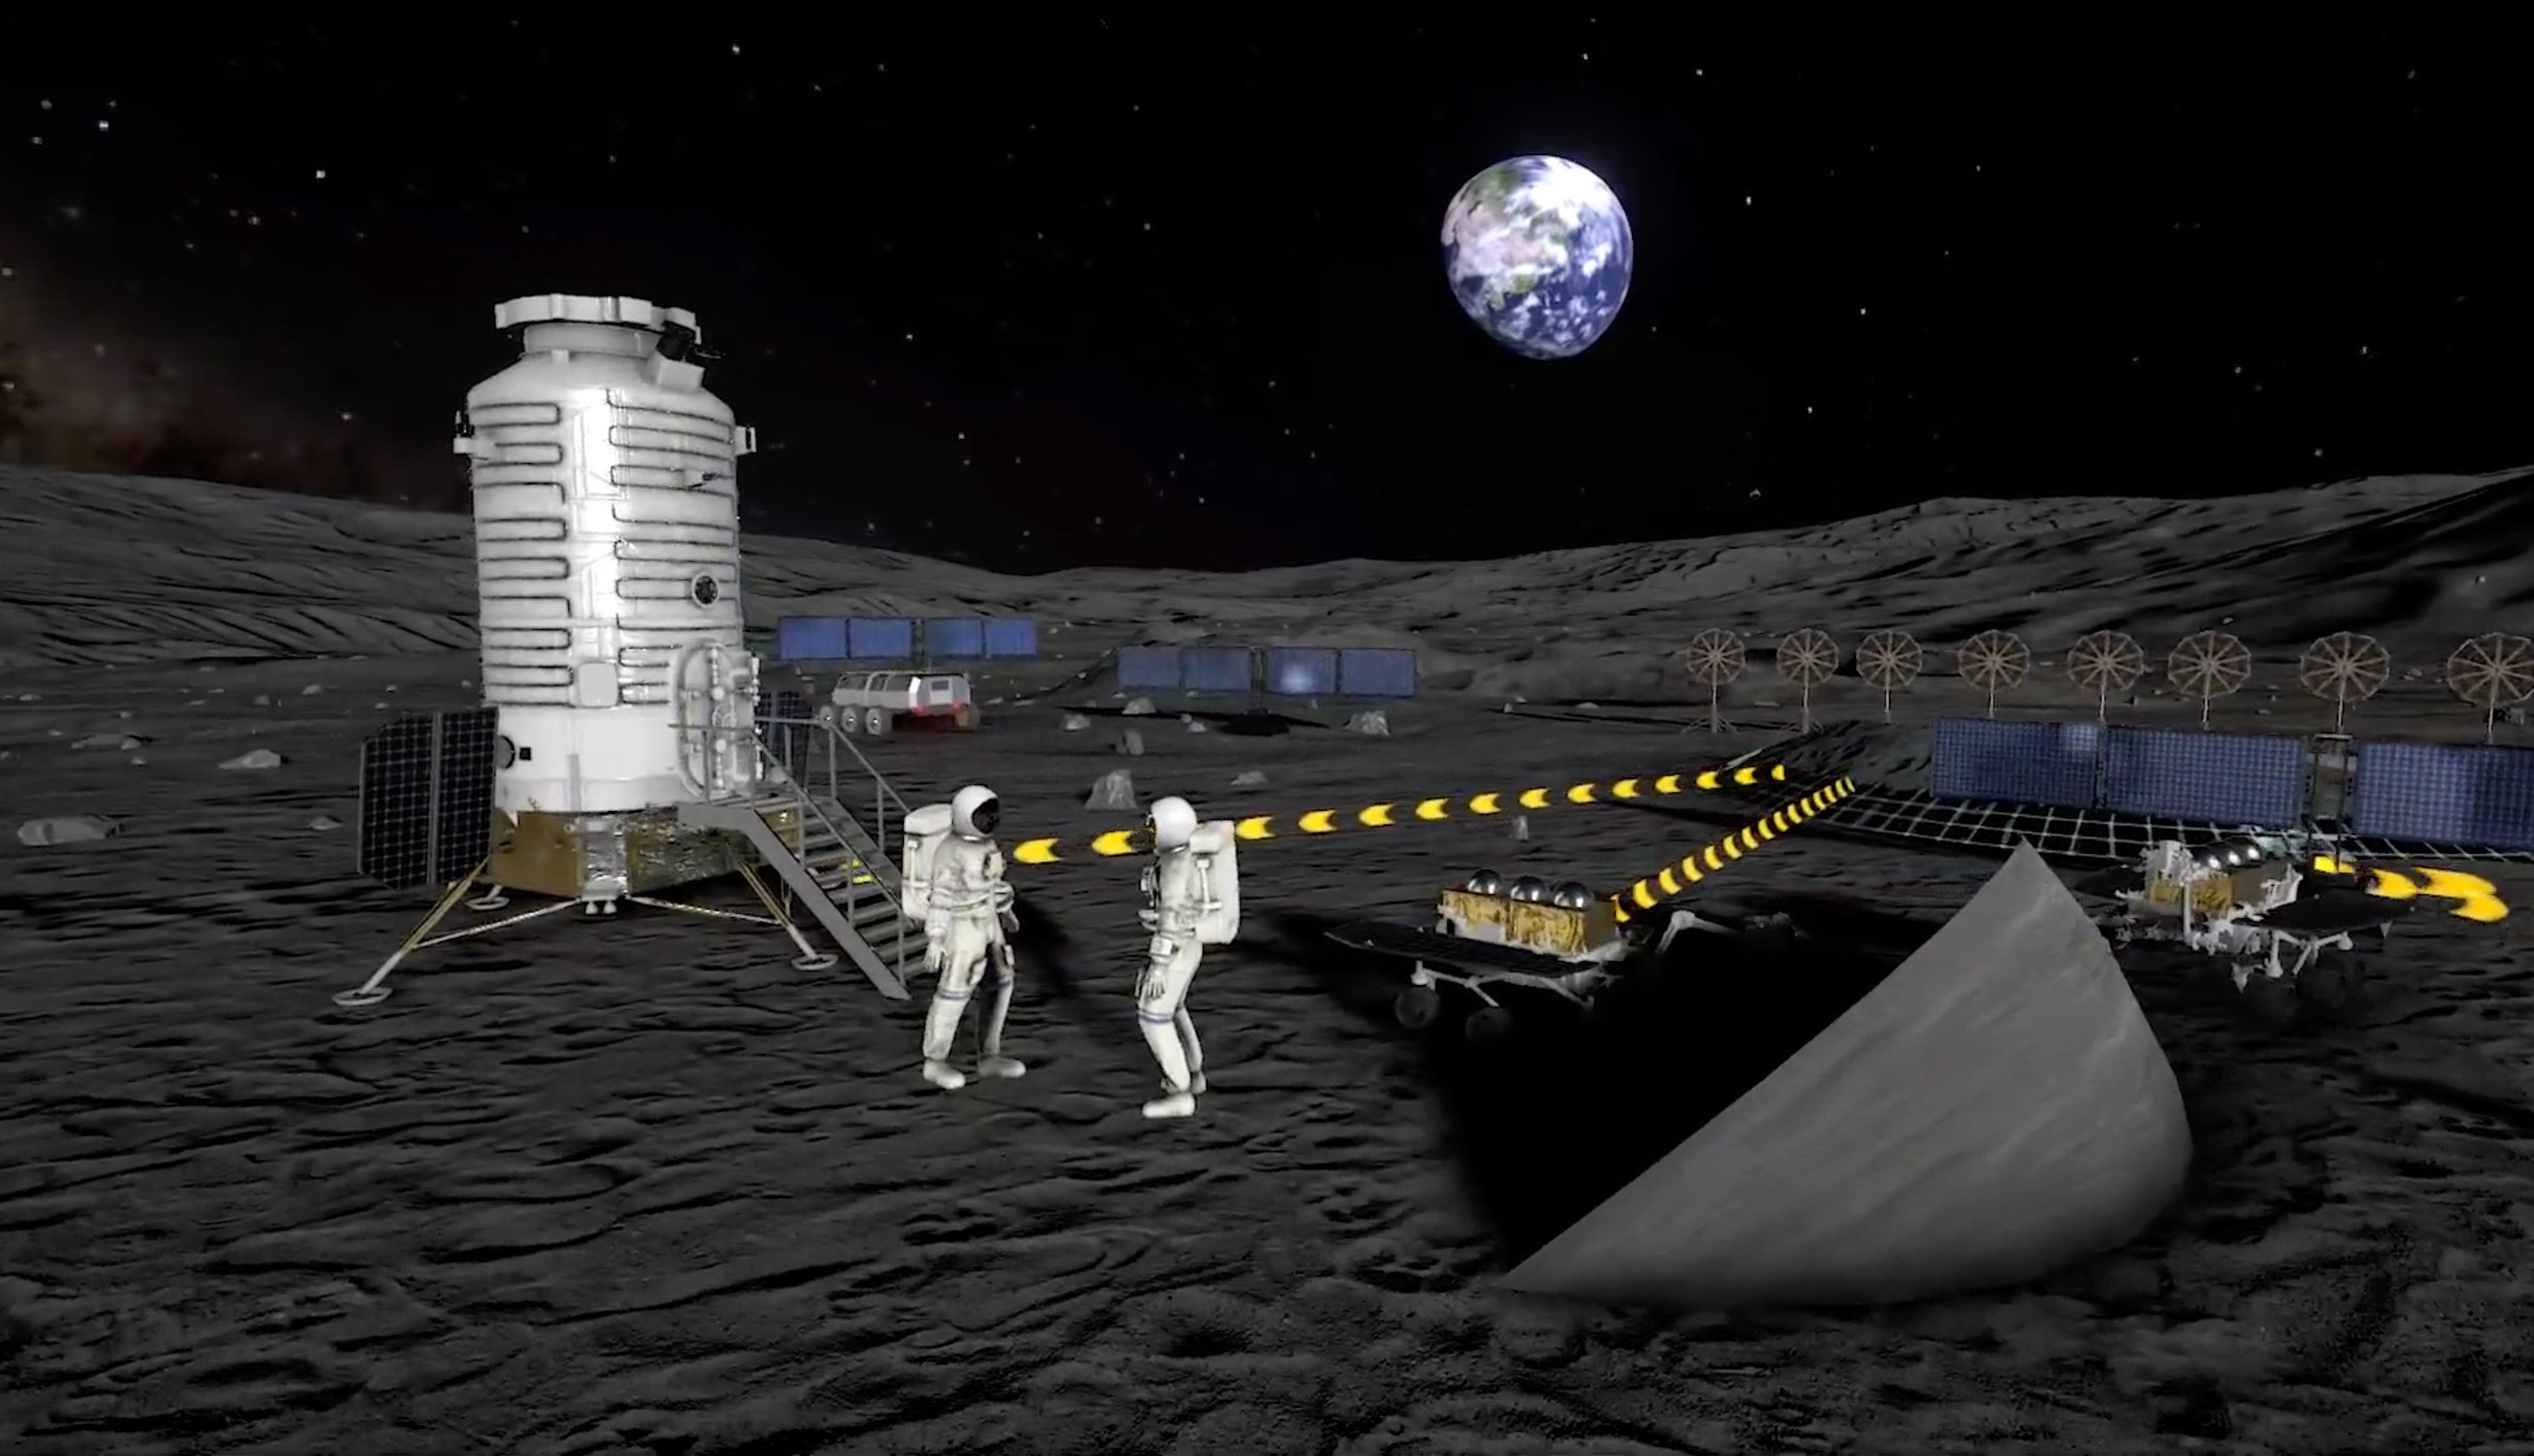 Screenshot from a video clip shows a  joint China-Russia  International Lunar Research Station to be completed by 2050 on the moon. Image: China National Space Administration